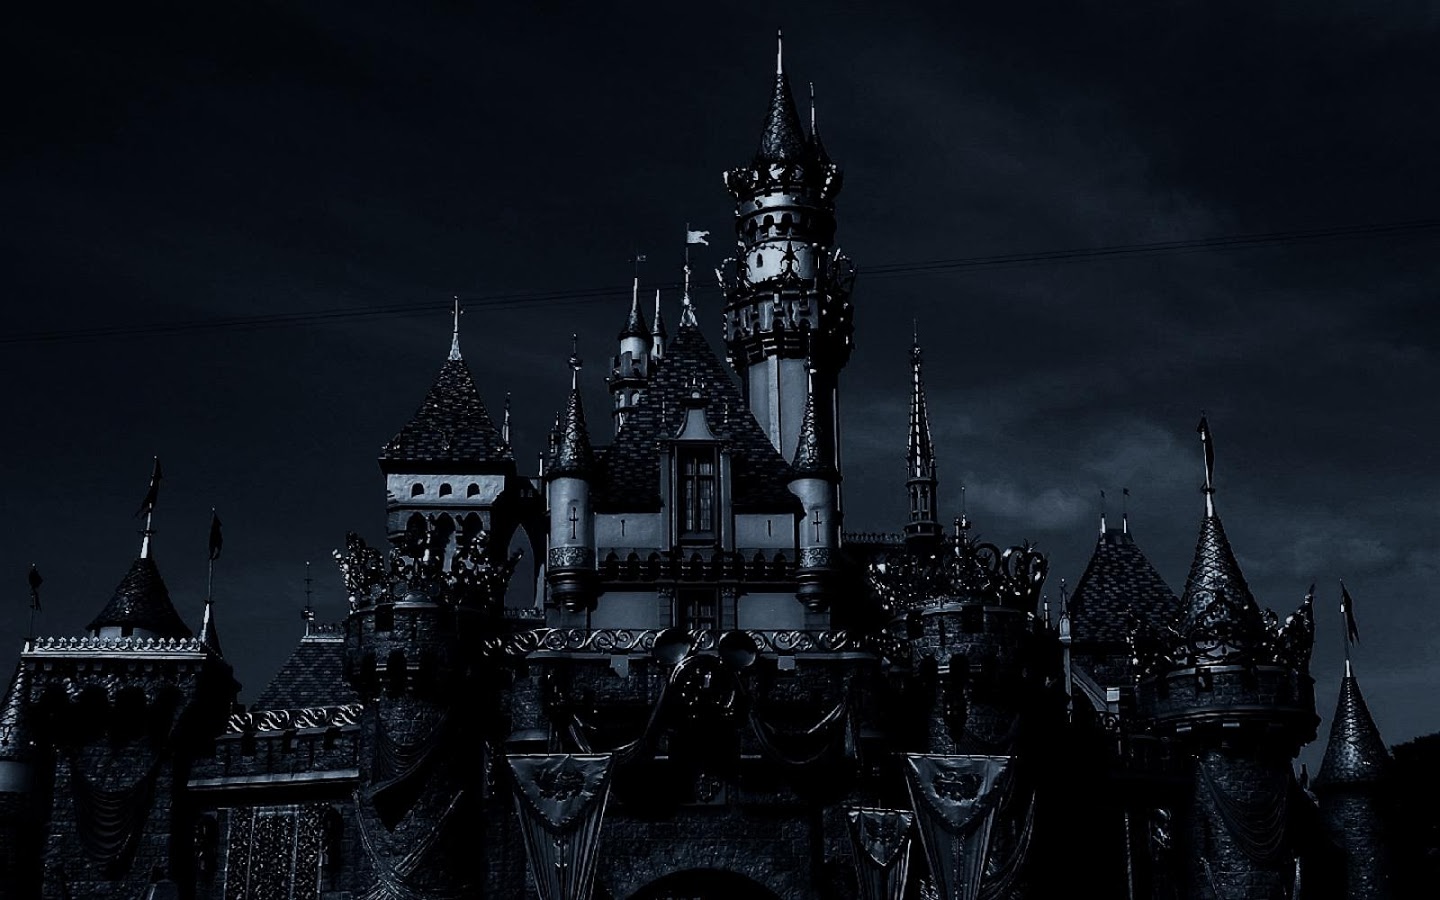 Dark Castle Live Wallpaper - Android Apps on Google Play